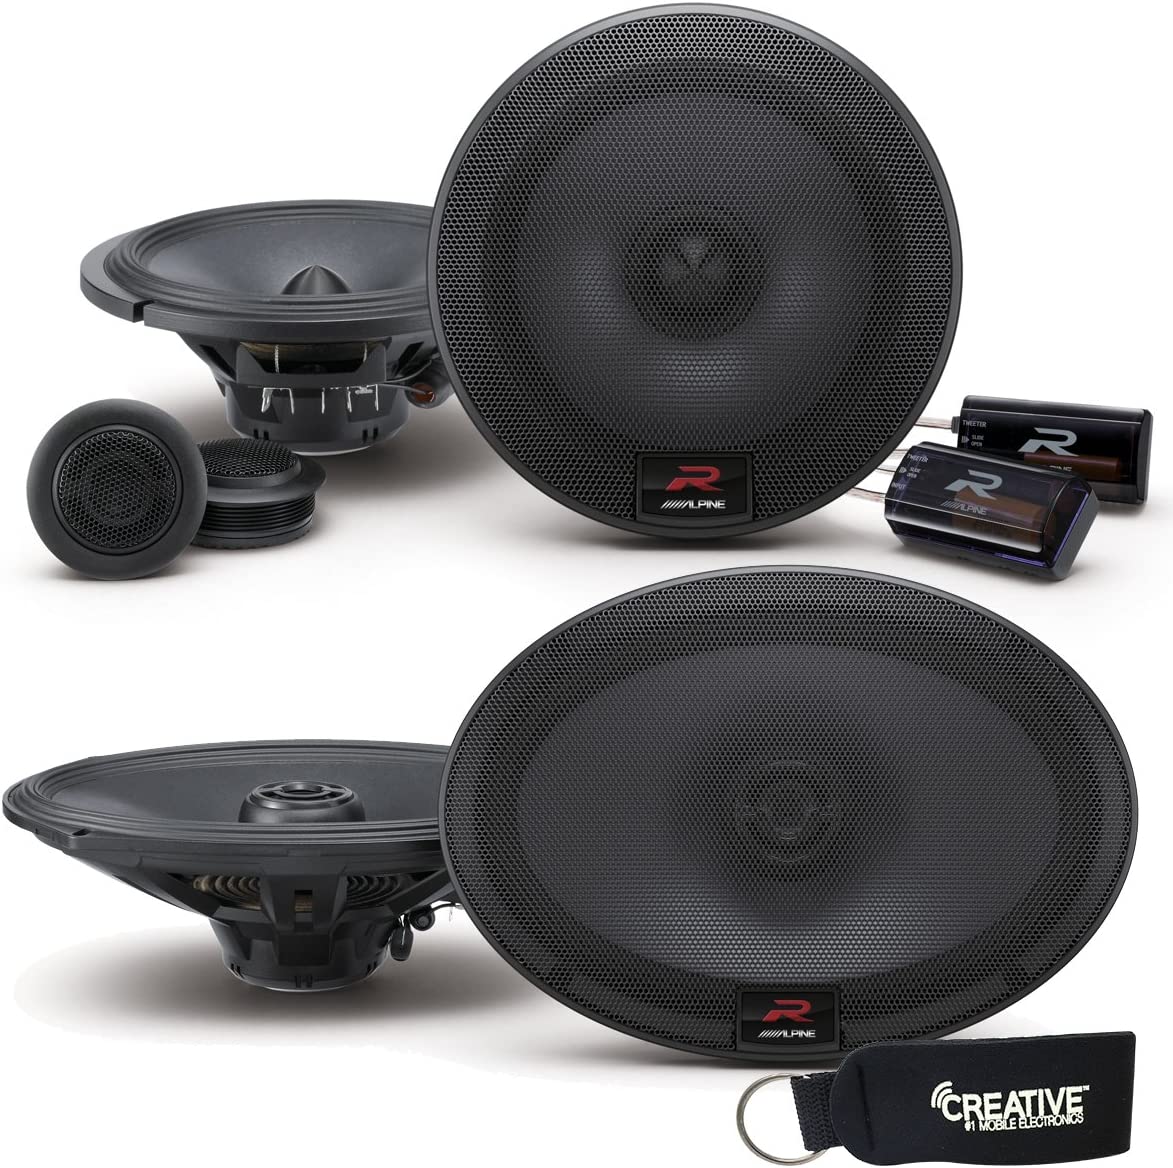 Alpine R-Series Bundle - A Pair of Alpine R-S65C 6.5 Inch Component 2-Way Speakers & Pair of R-S69 6x9 Coaxial Speakers